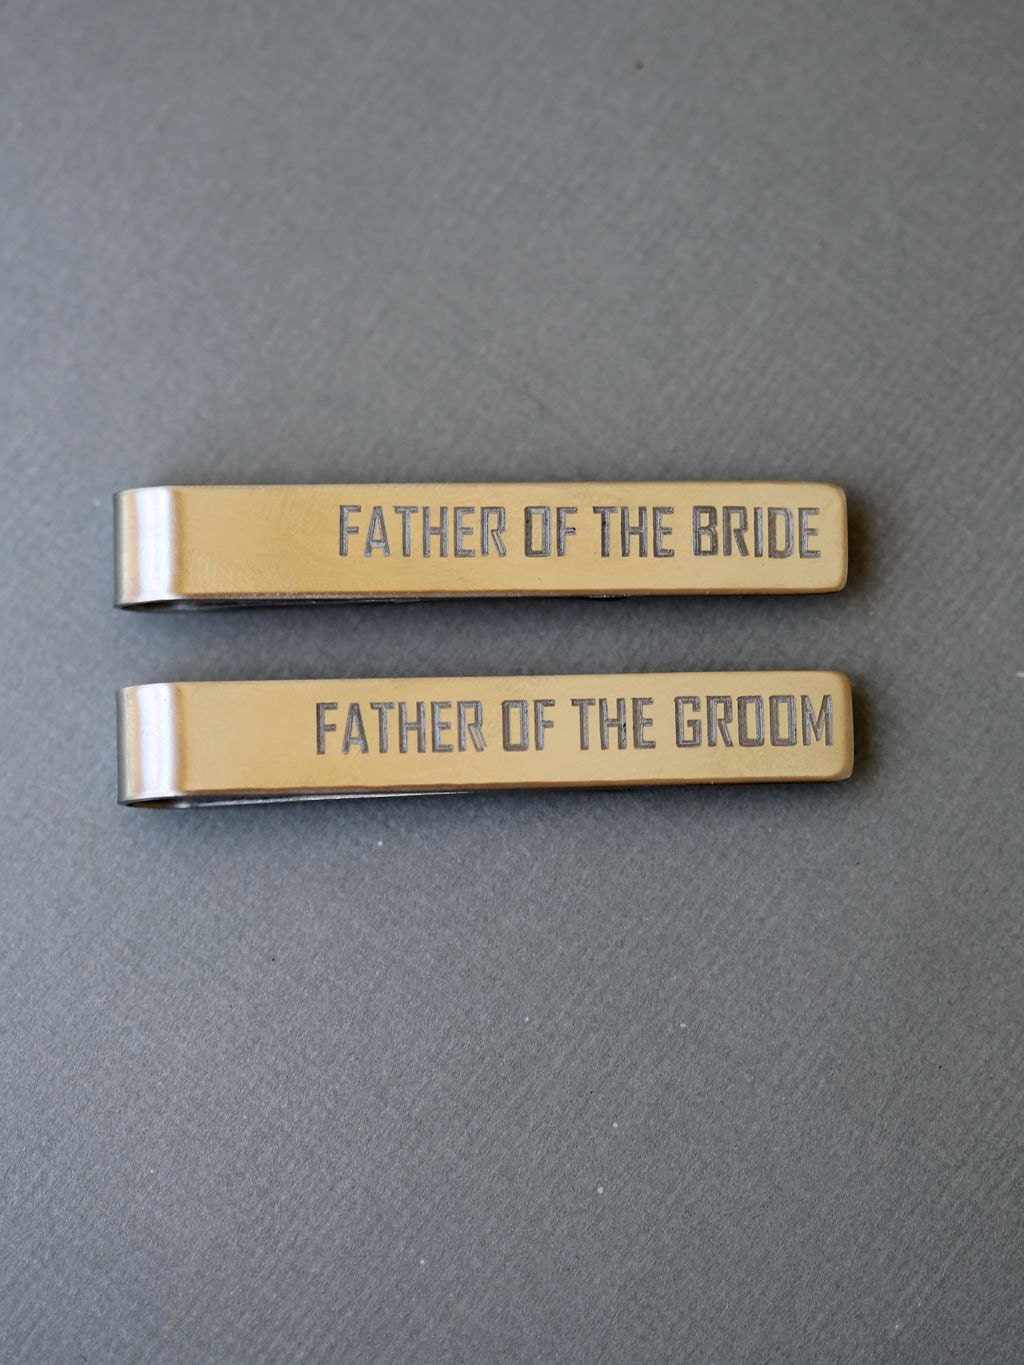 Father of the Bride and Groom Personalized Tie Clips Custom - Etsy